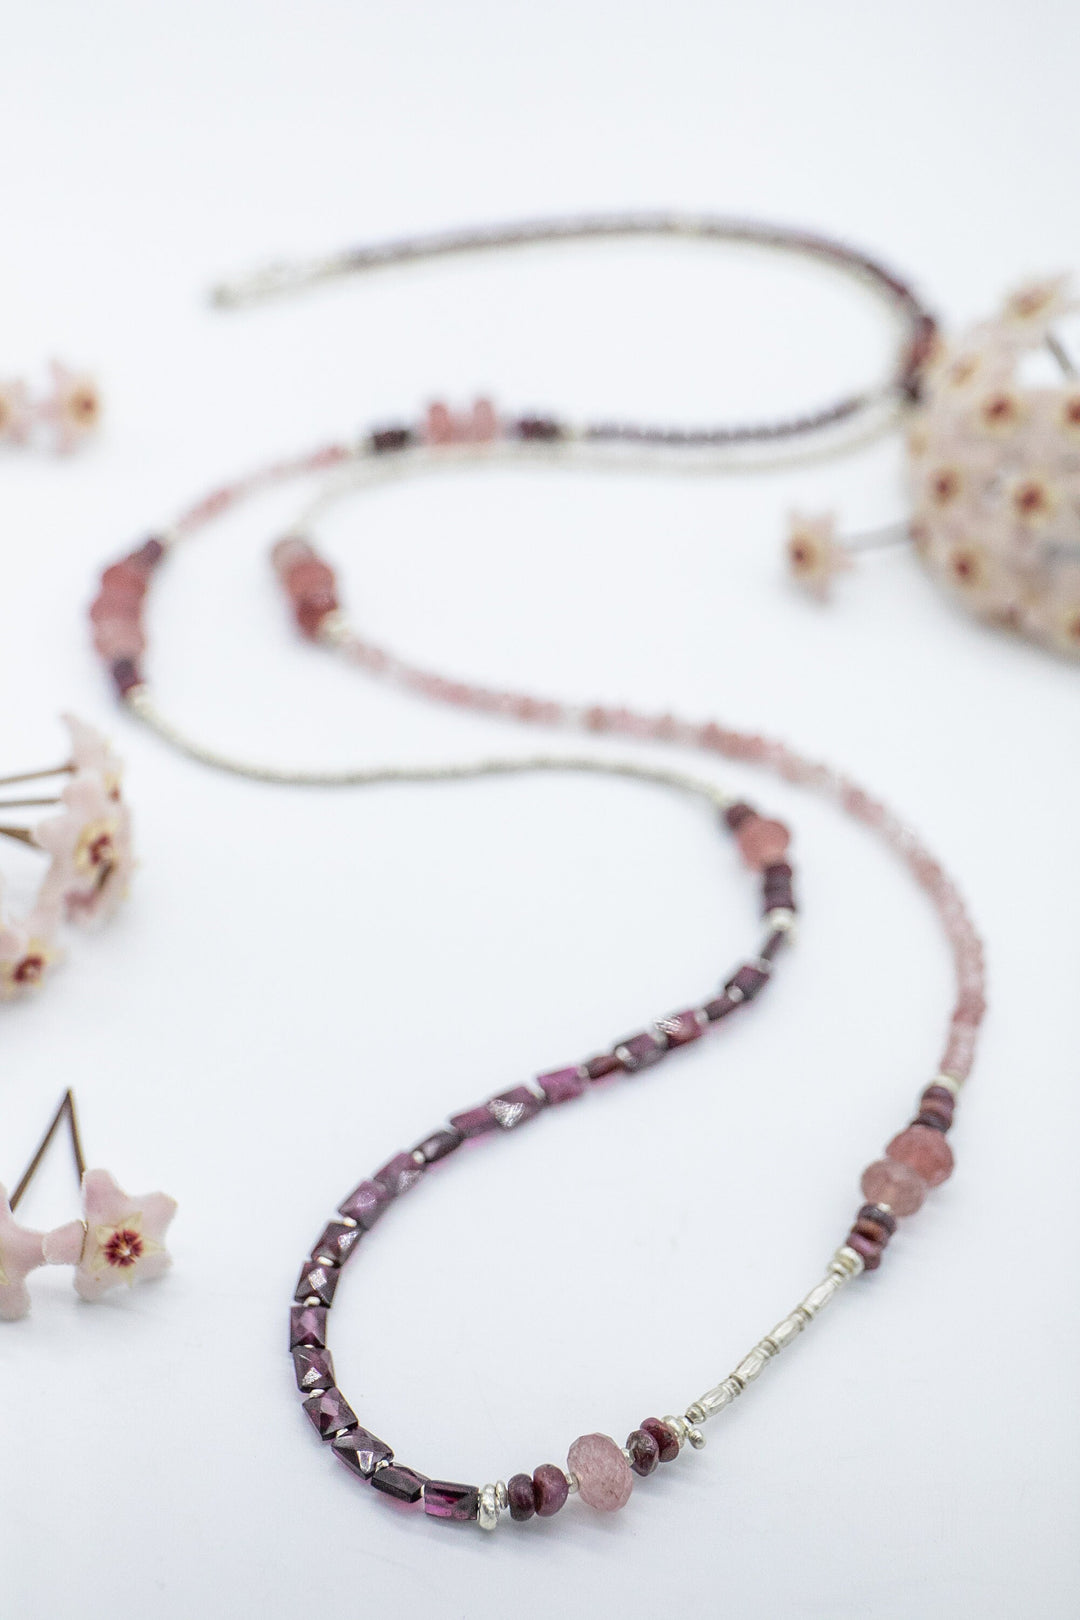 Long Cherry Quartz, Ruby + Garnet Beaded Necklace with Thai Hill Tribe Silver Beads